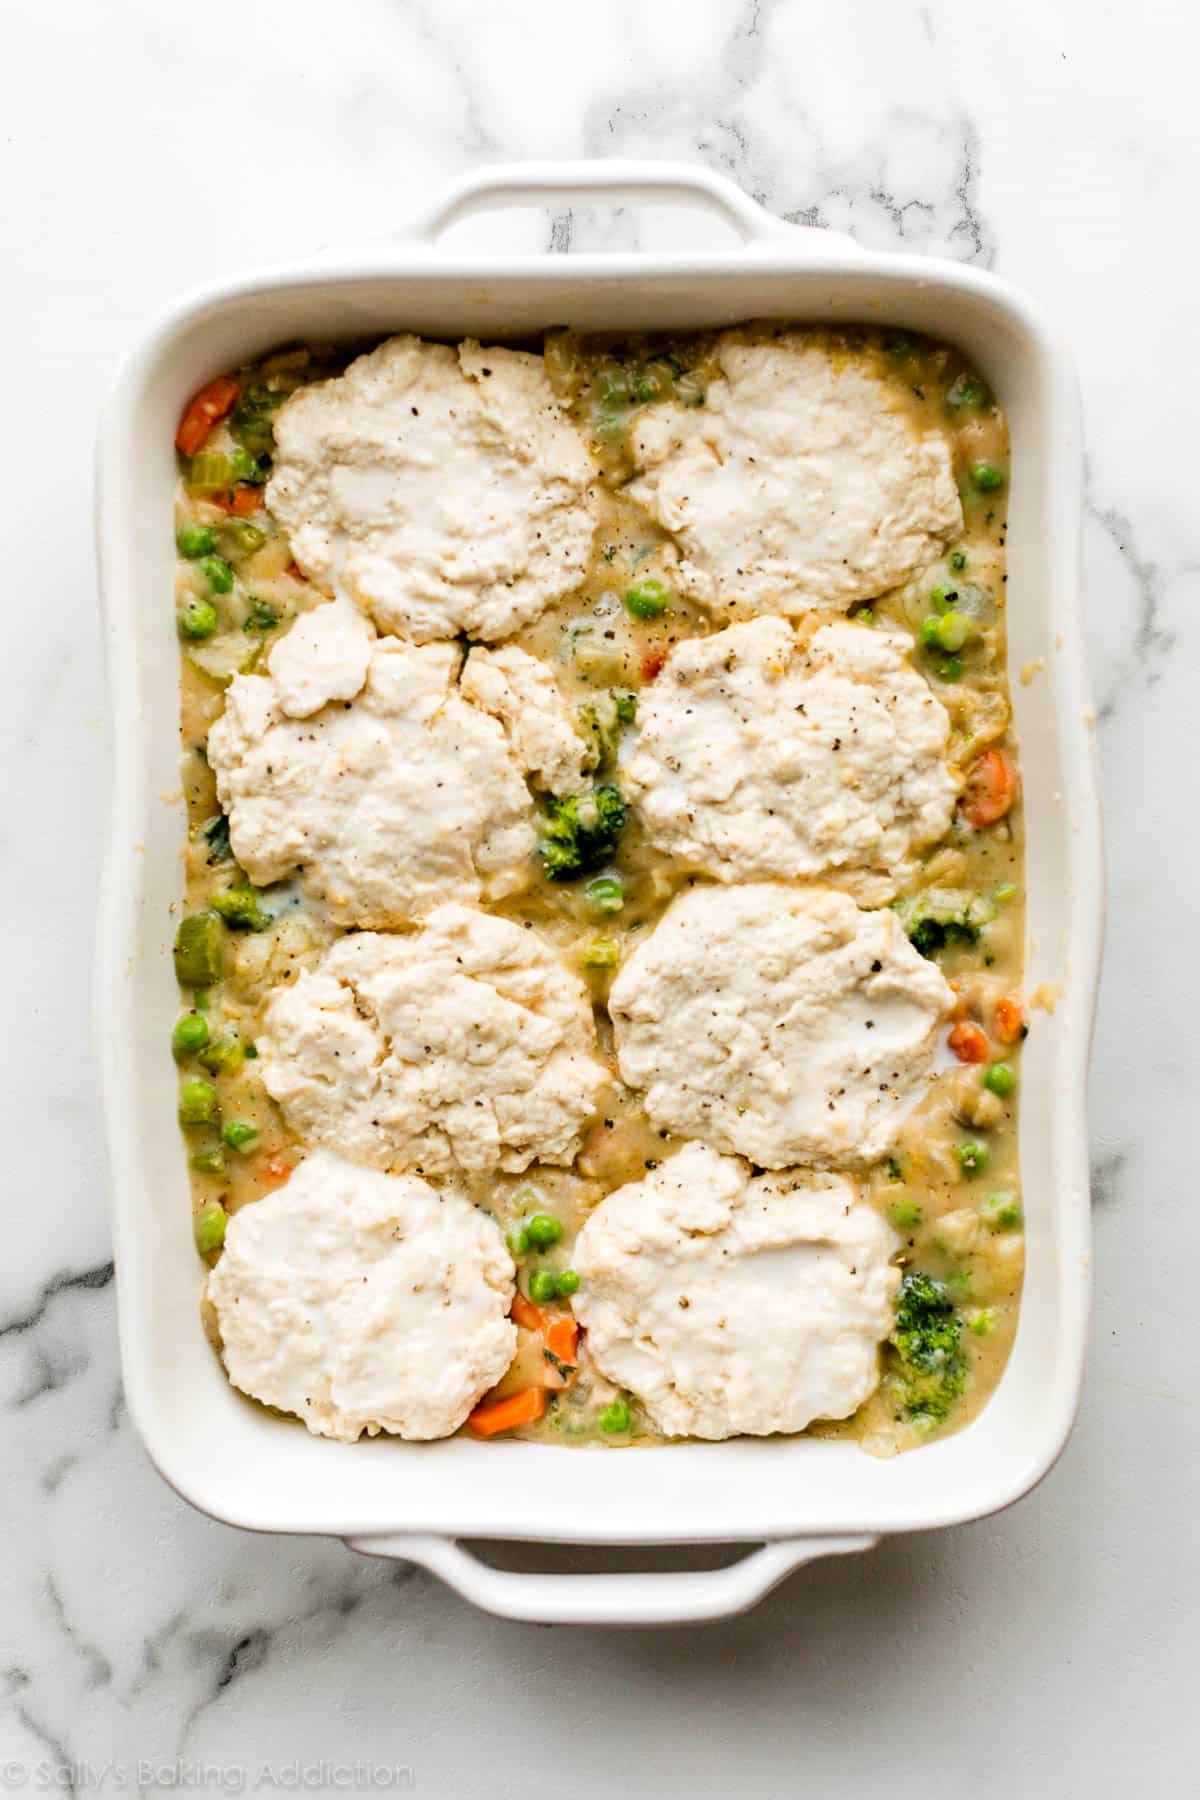 vegetable pot pie with biscuit topping before baking